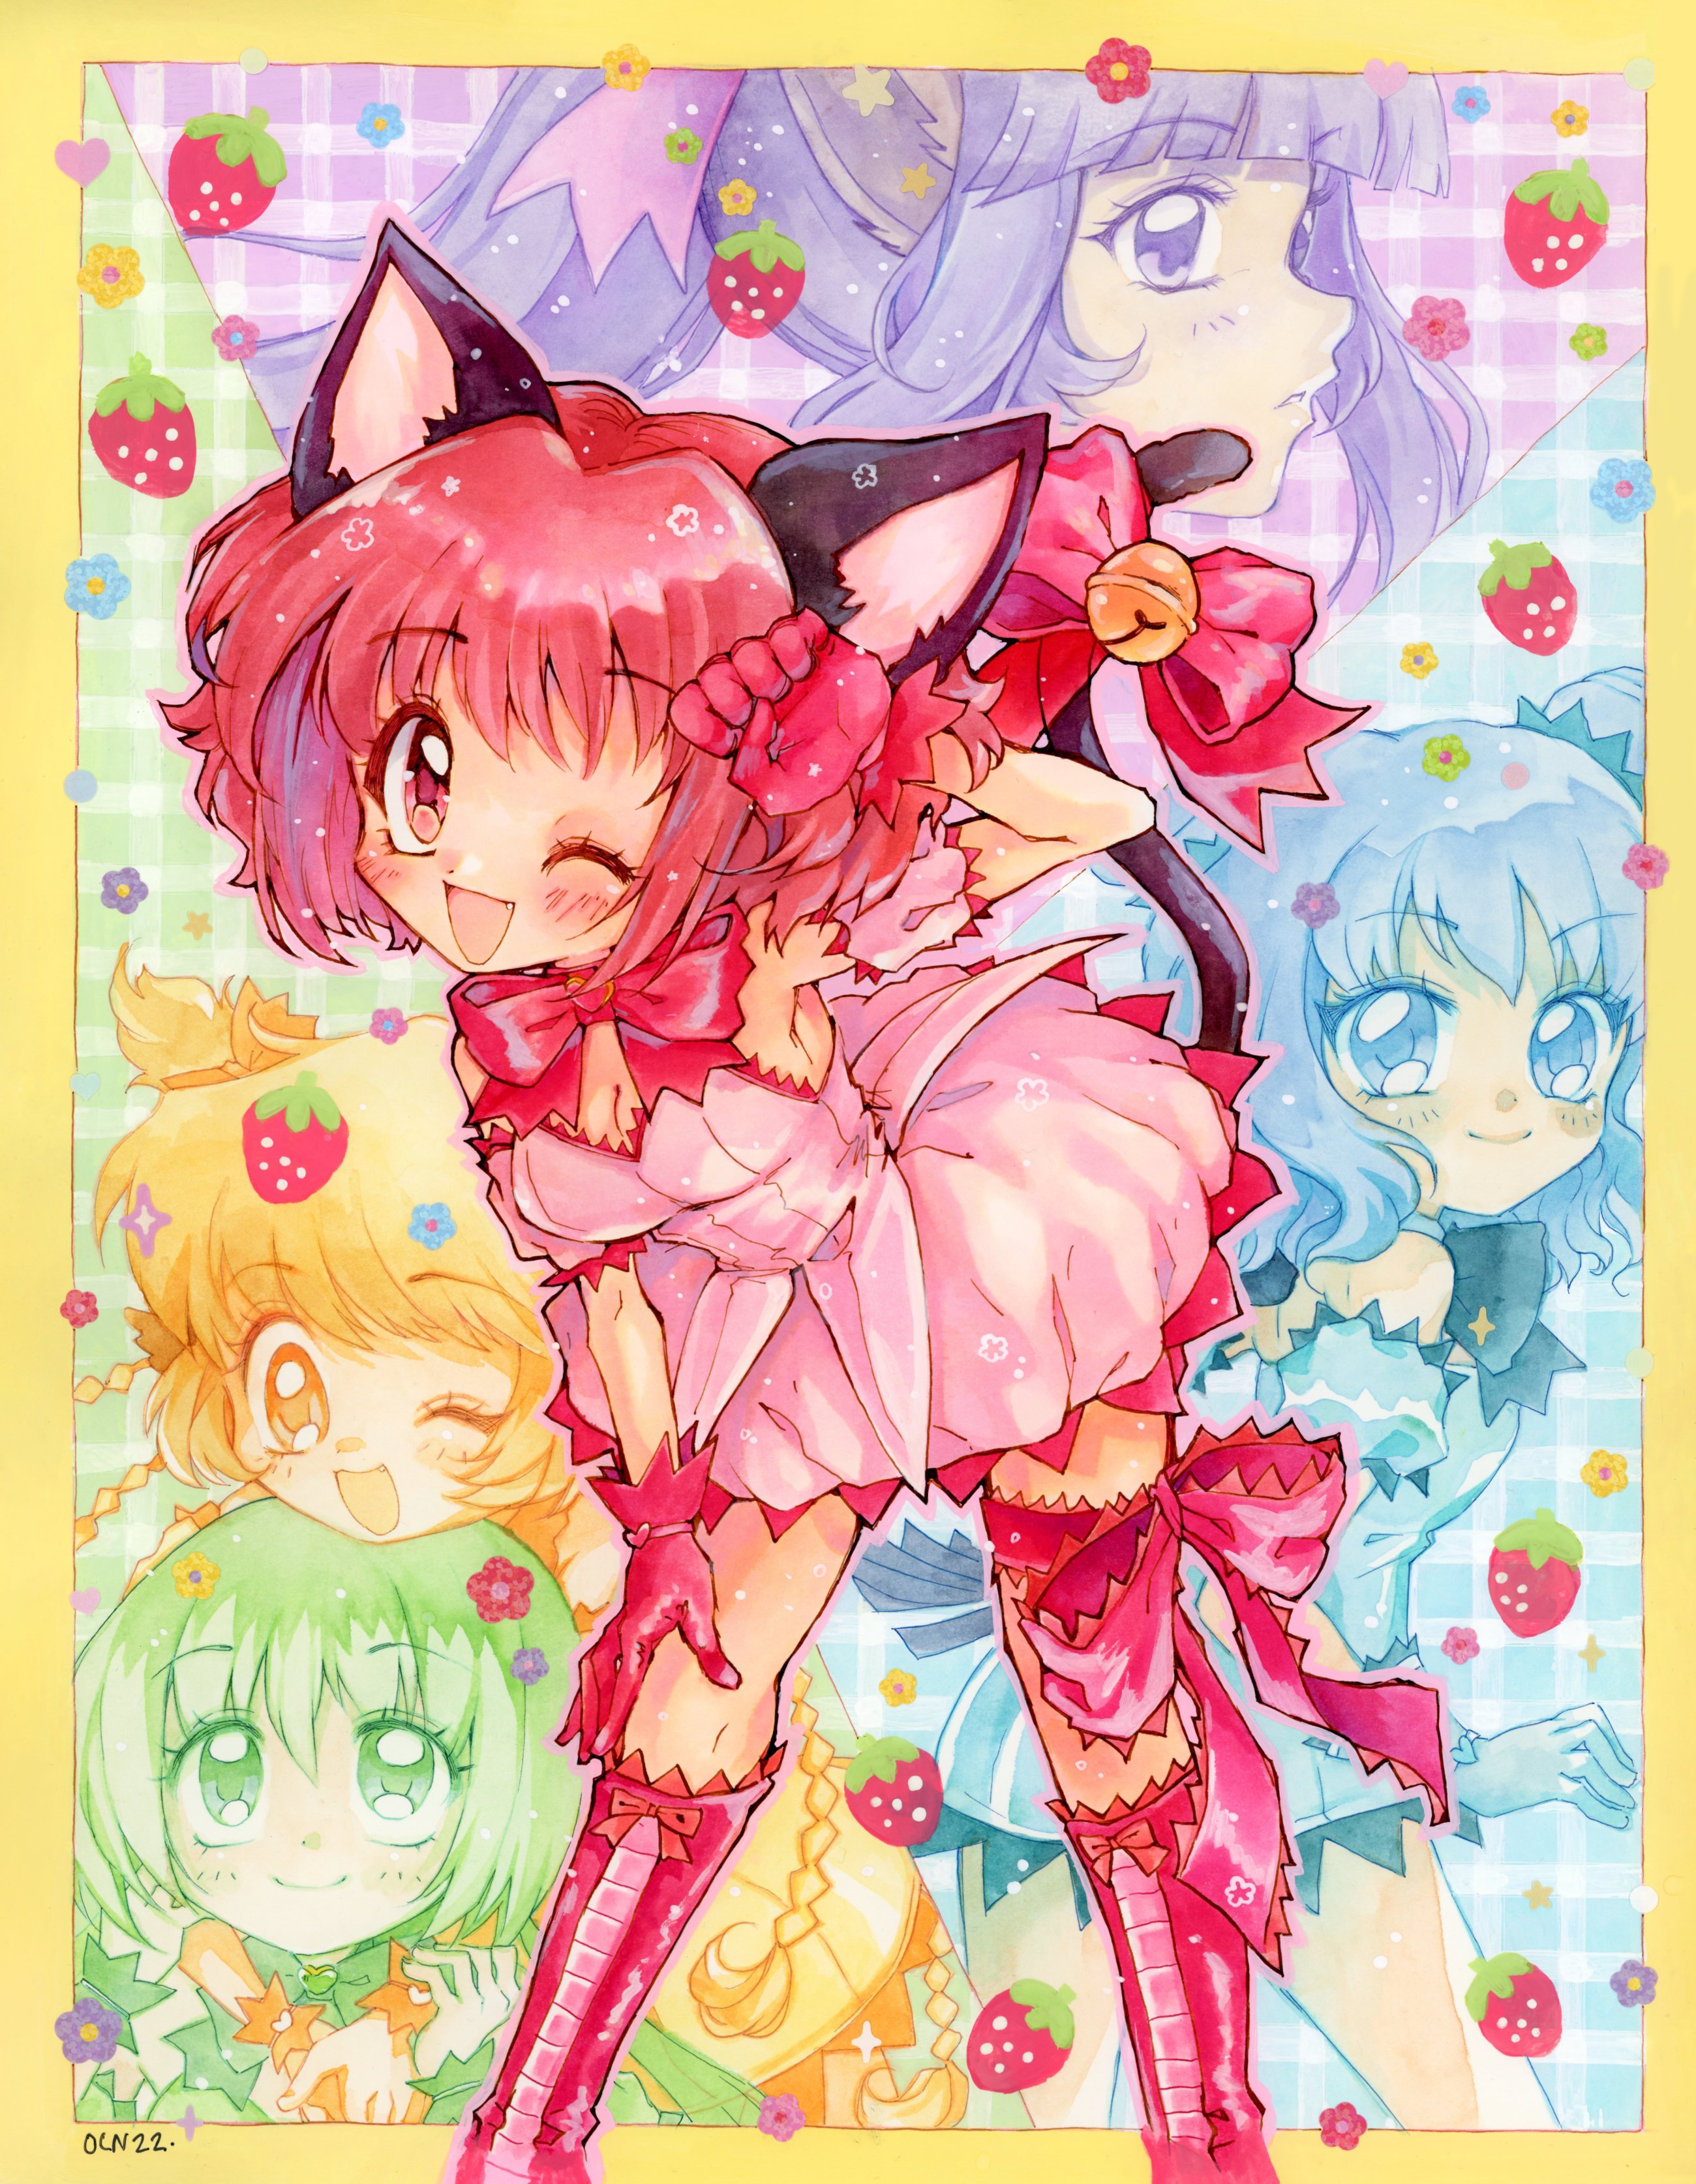 Tokyo Mew Mew New Official Trailer 